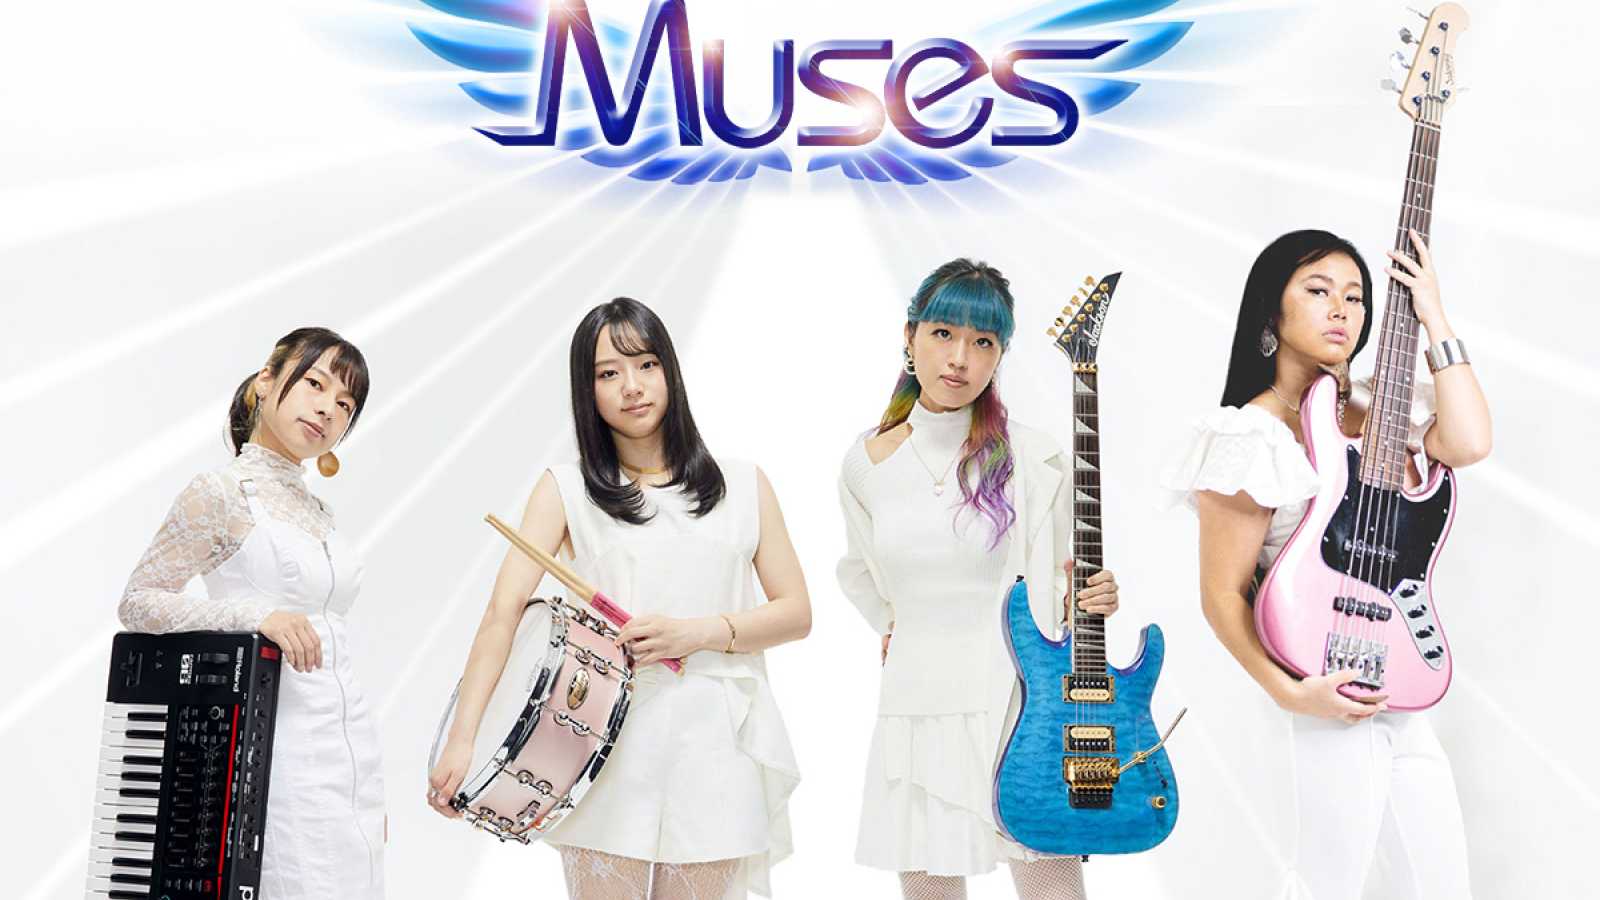 Nowy zespół: Muses © Poppin Records. All rights reserved.